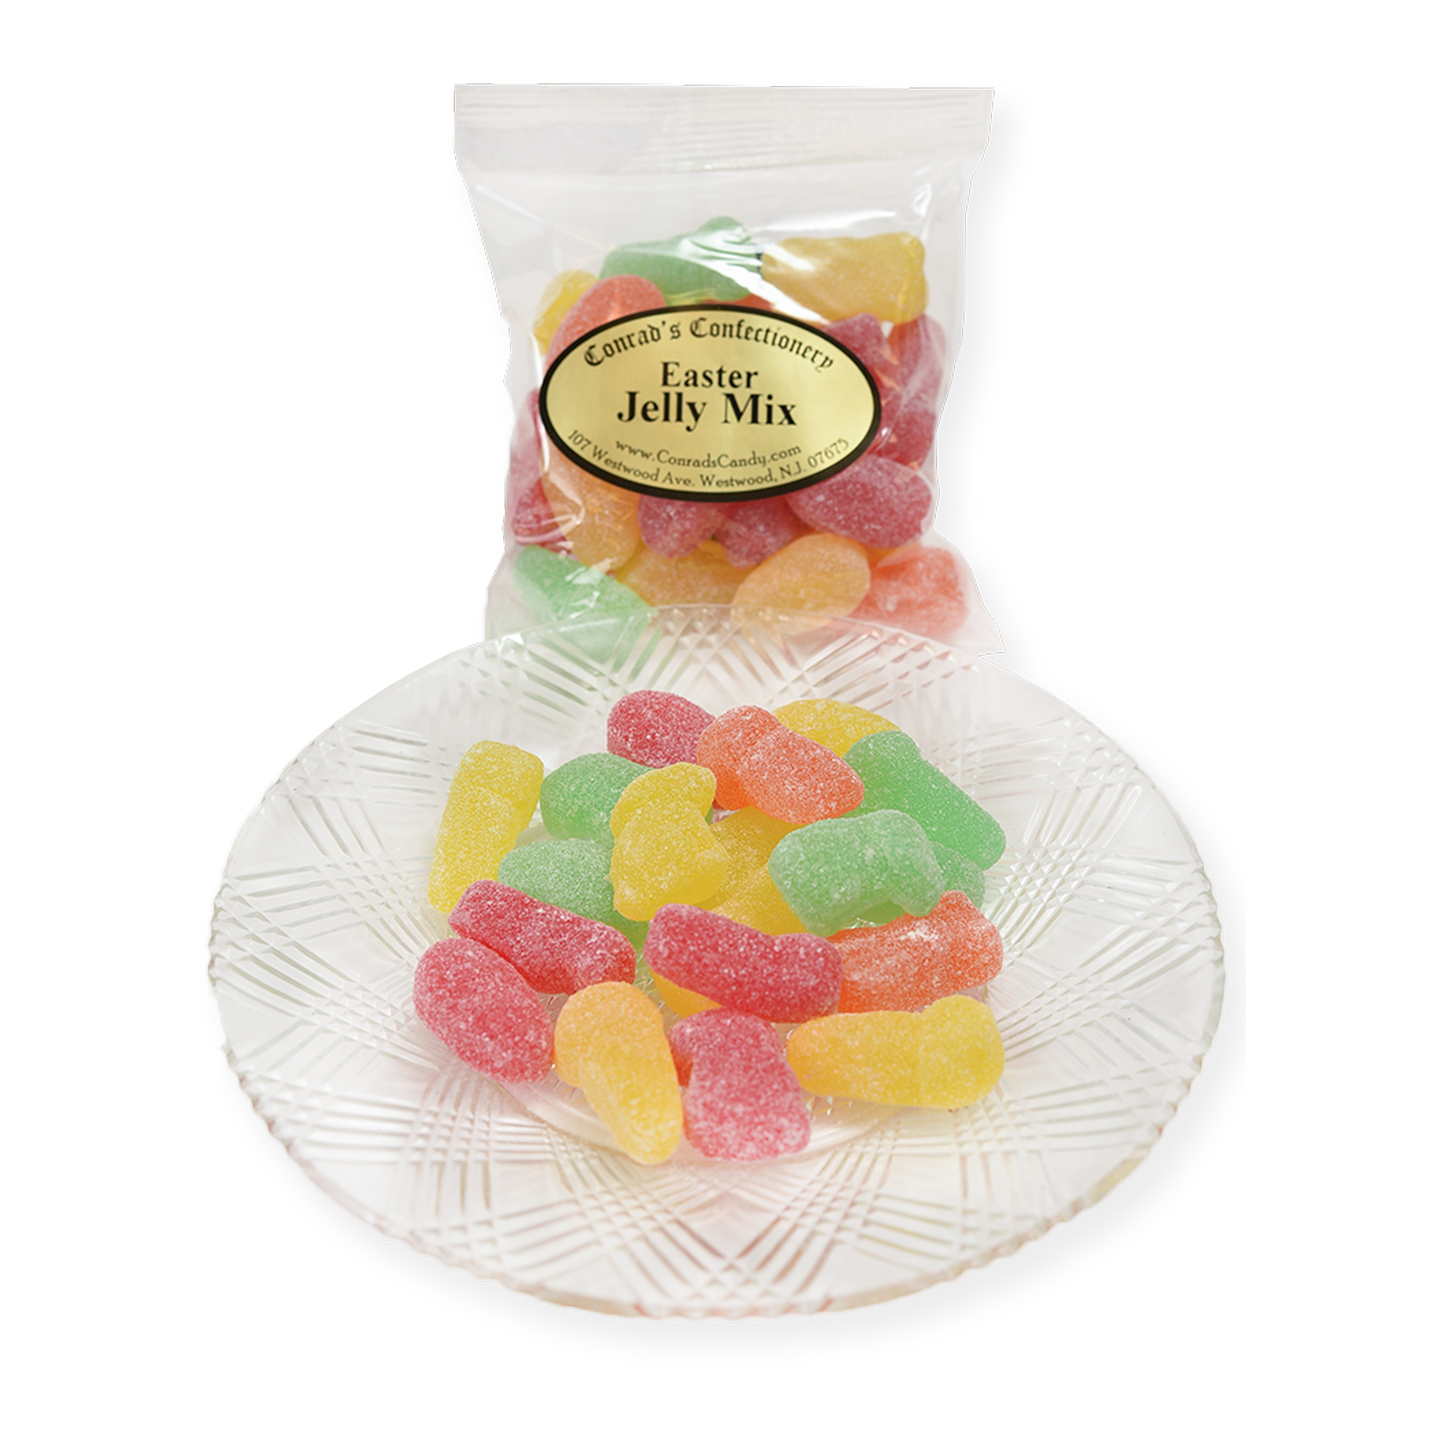 Easter Jelly Mix- 4 oz bag